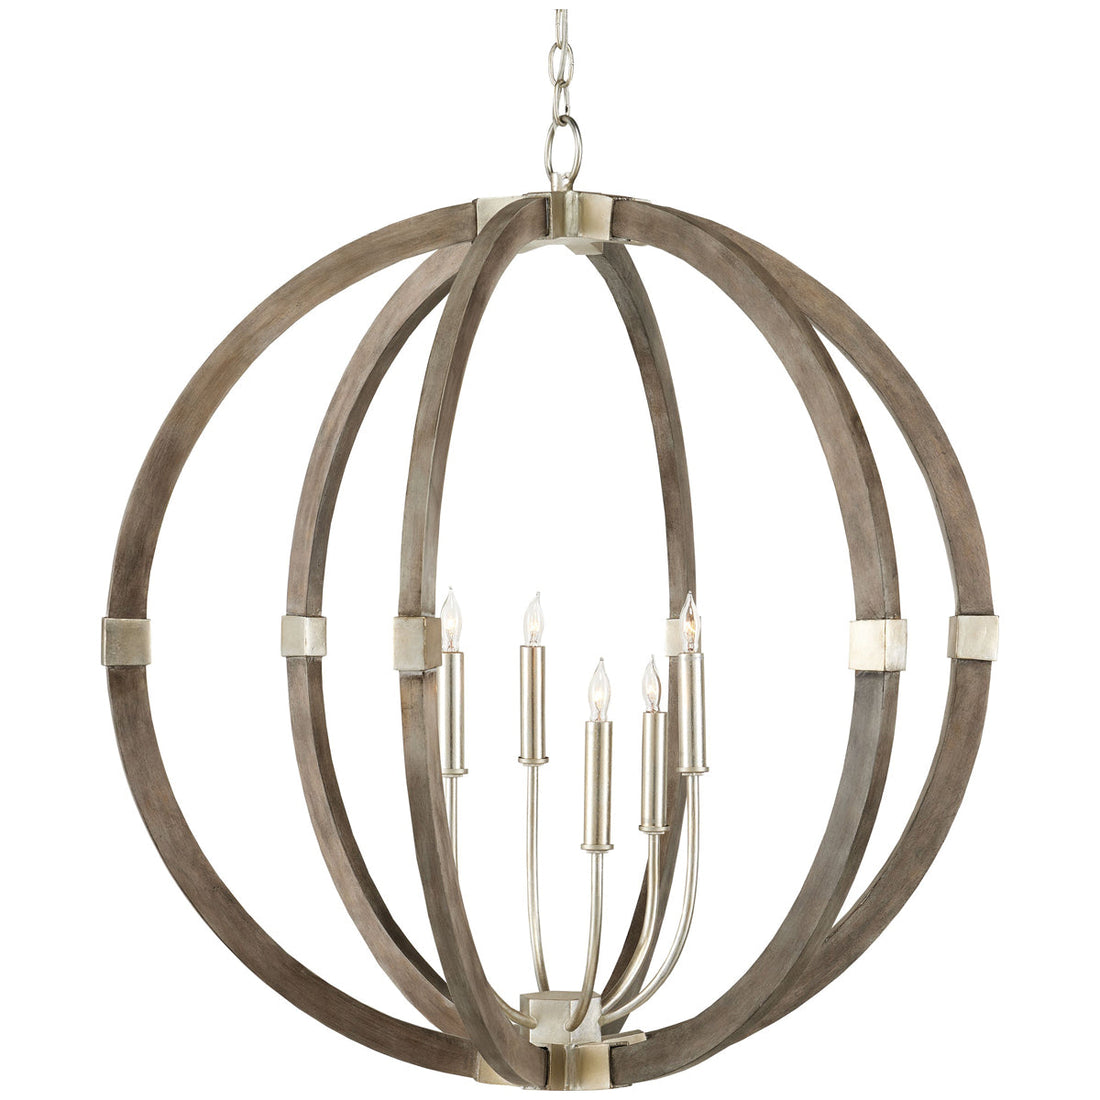 Currey and Company Bastian Orb Chandelier